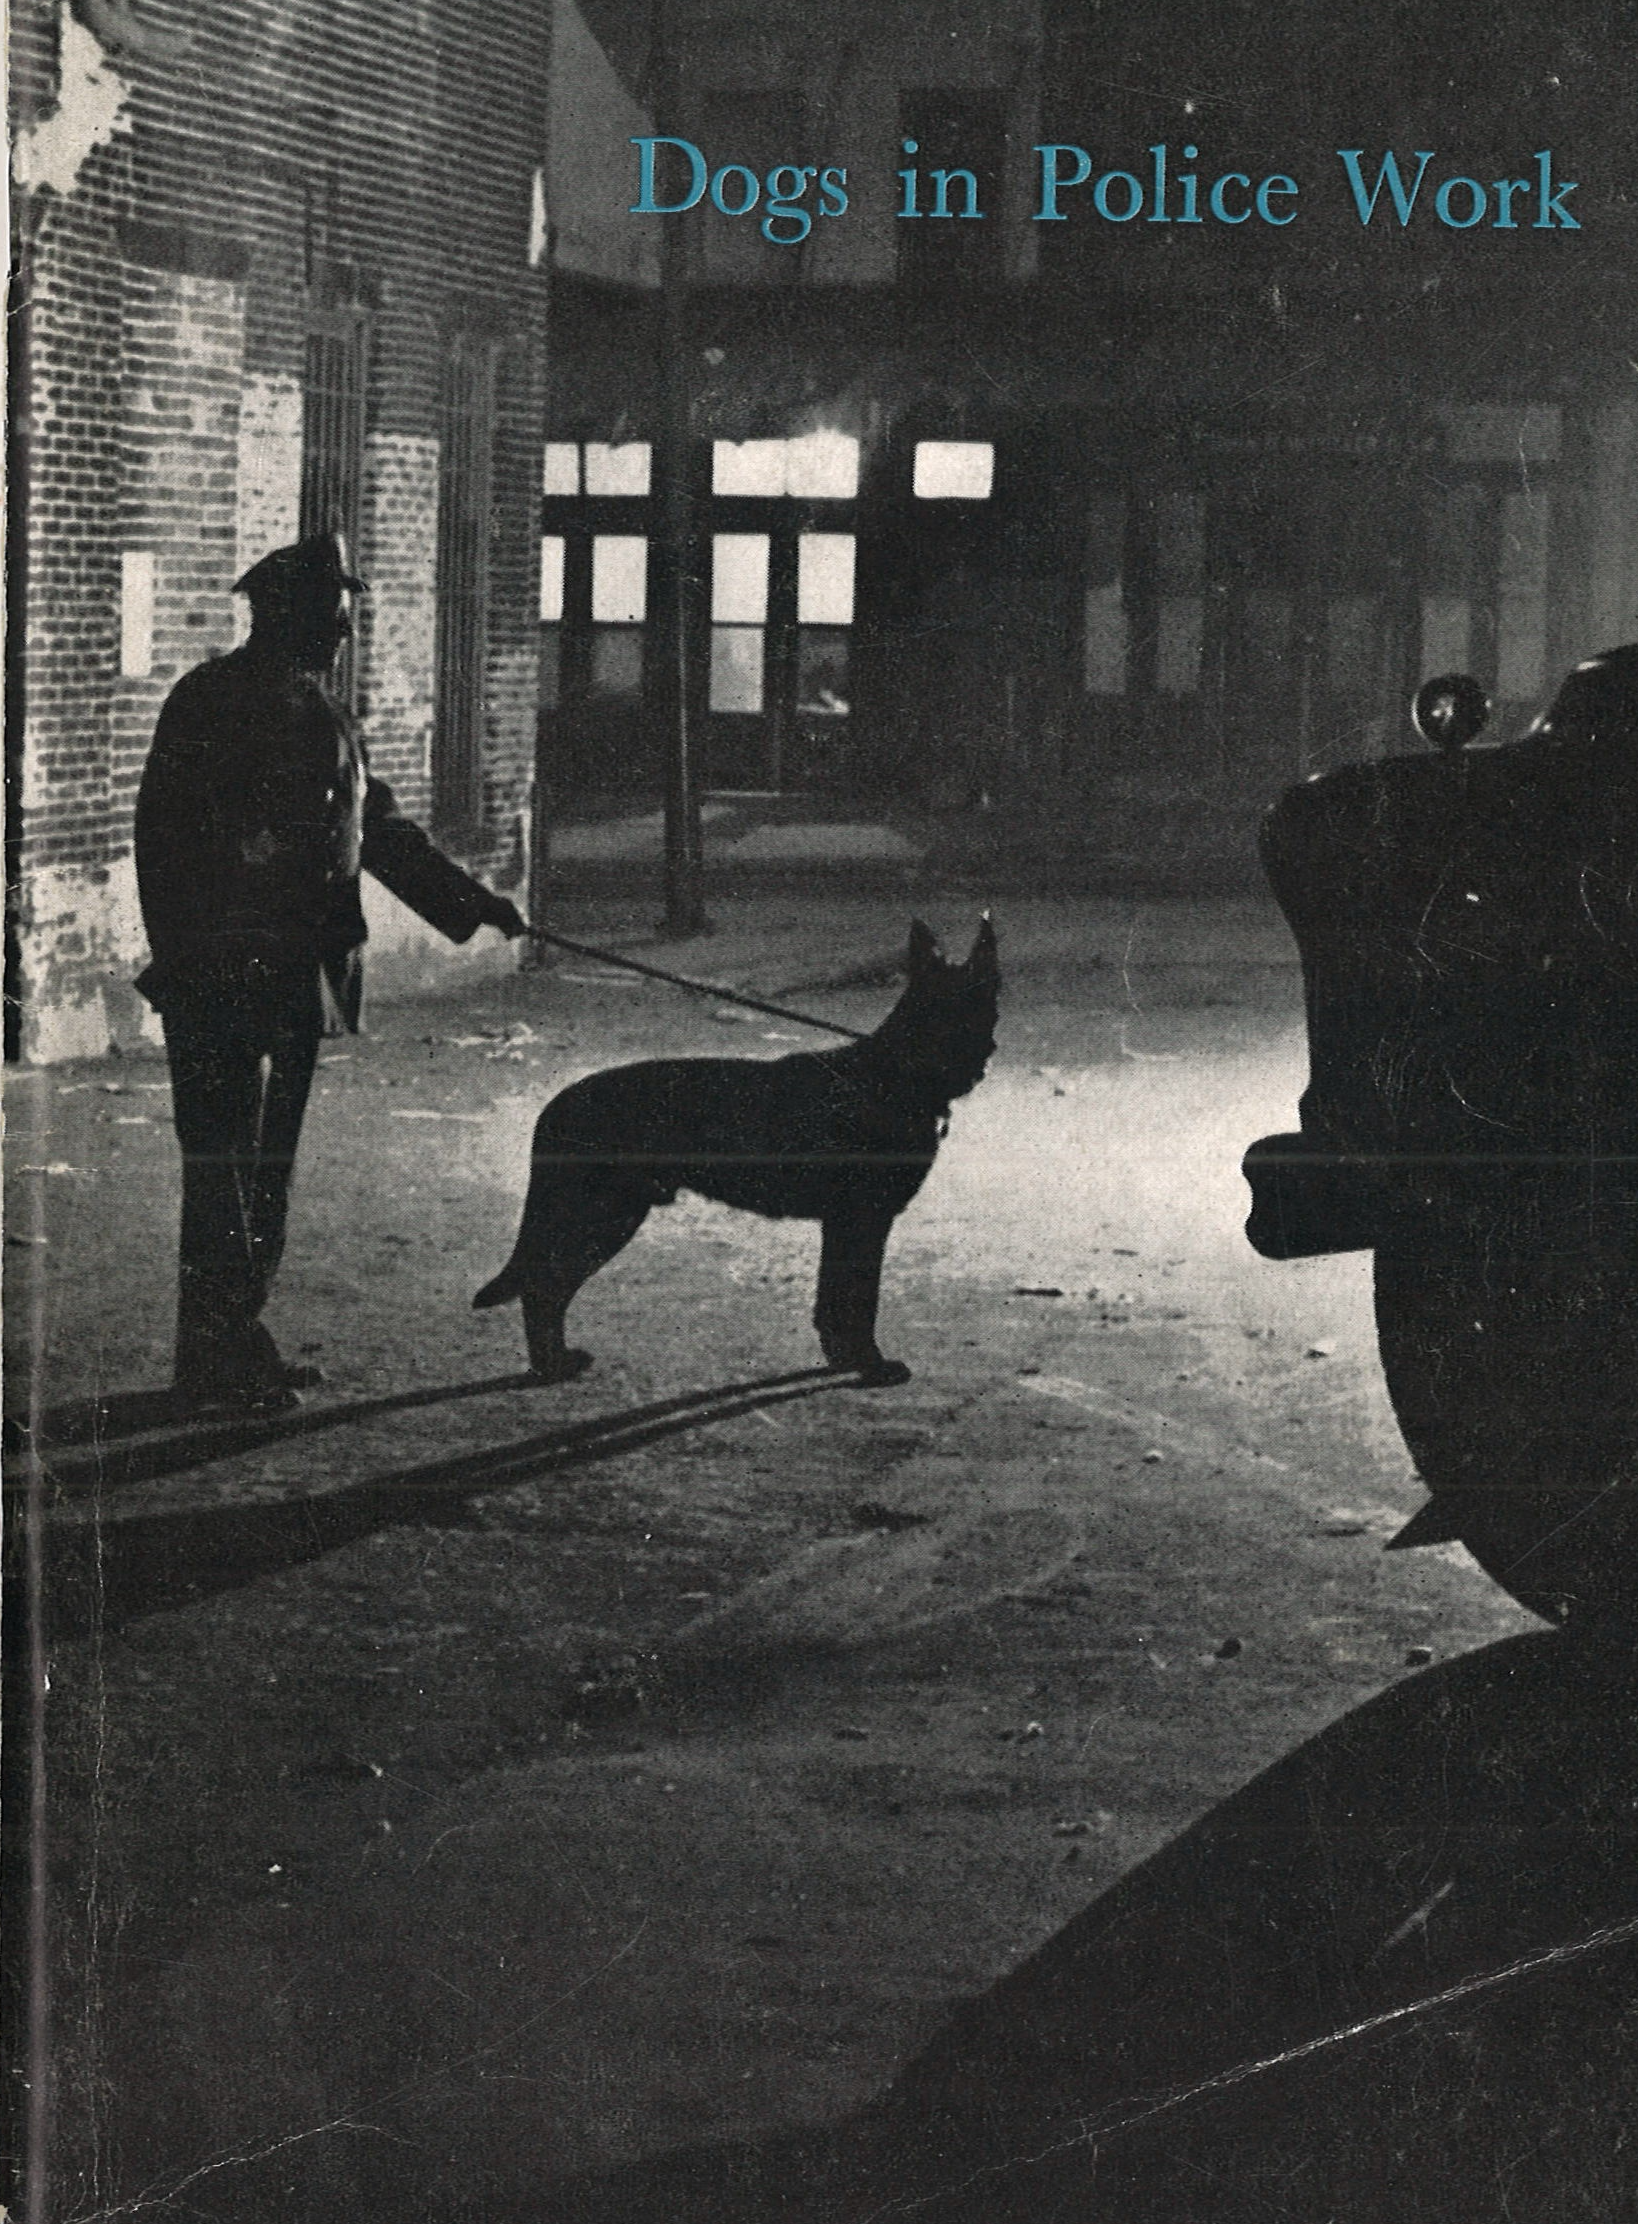 The cover of Dogs in Police Work.